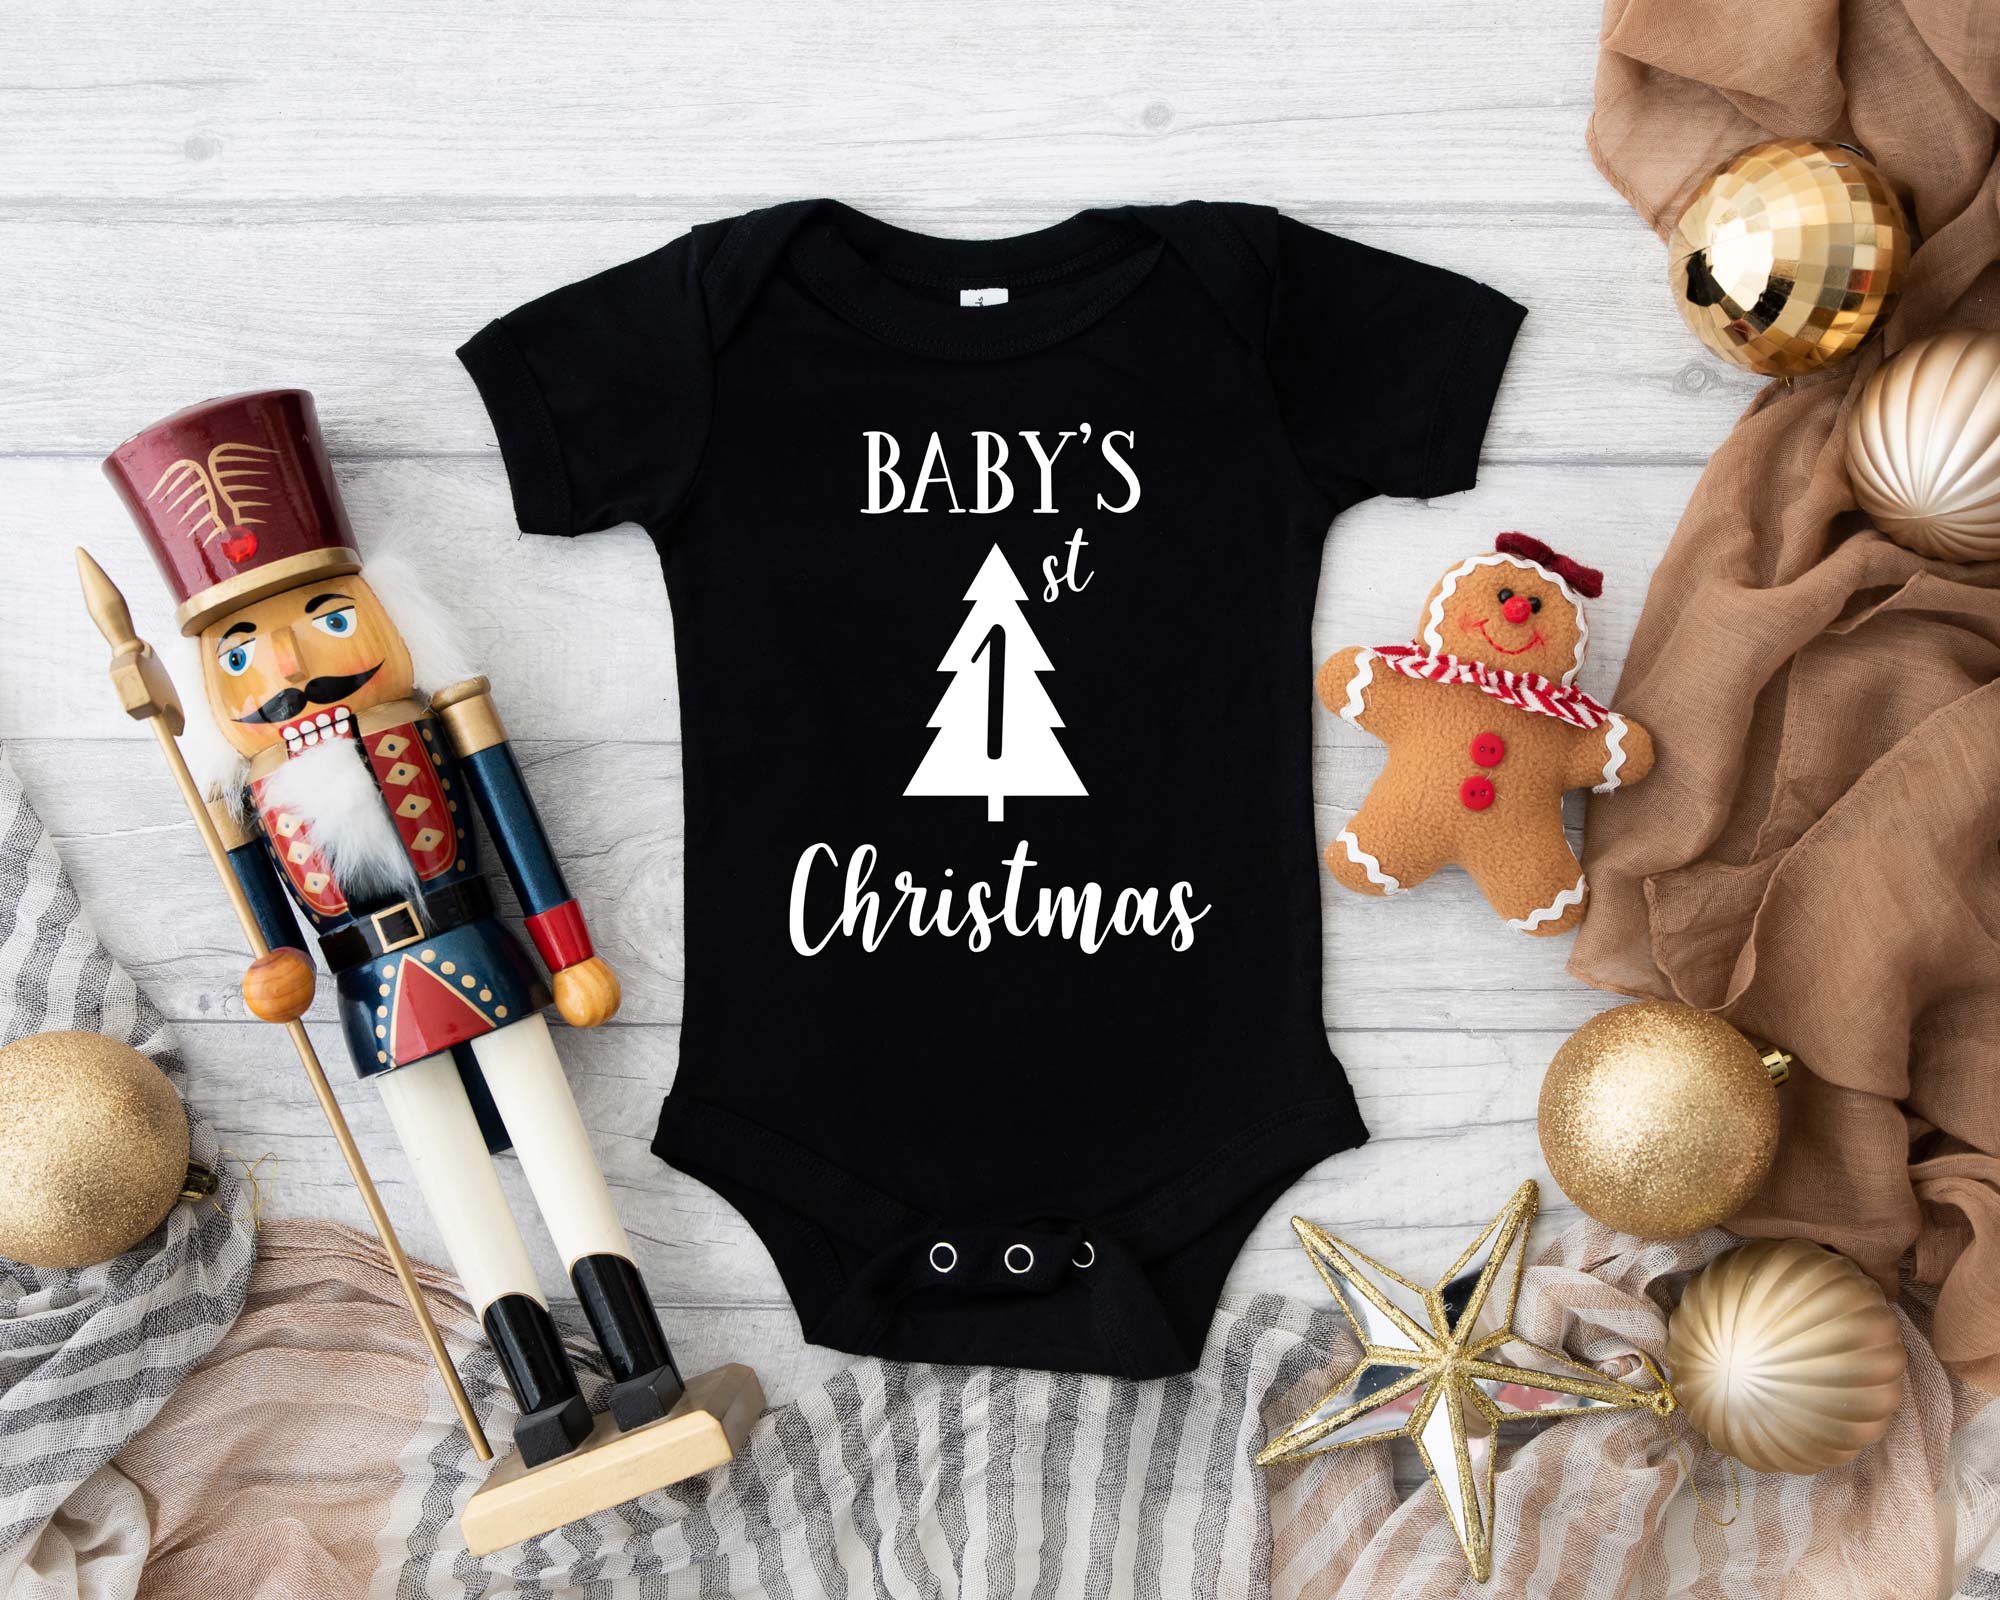 Baby's Personalised First Christmas Baby Vest. Designed and made in the UK.